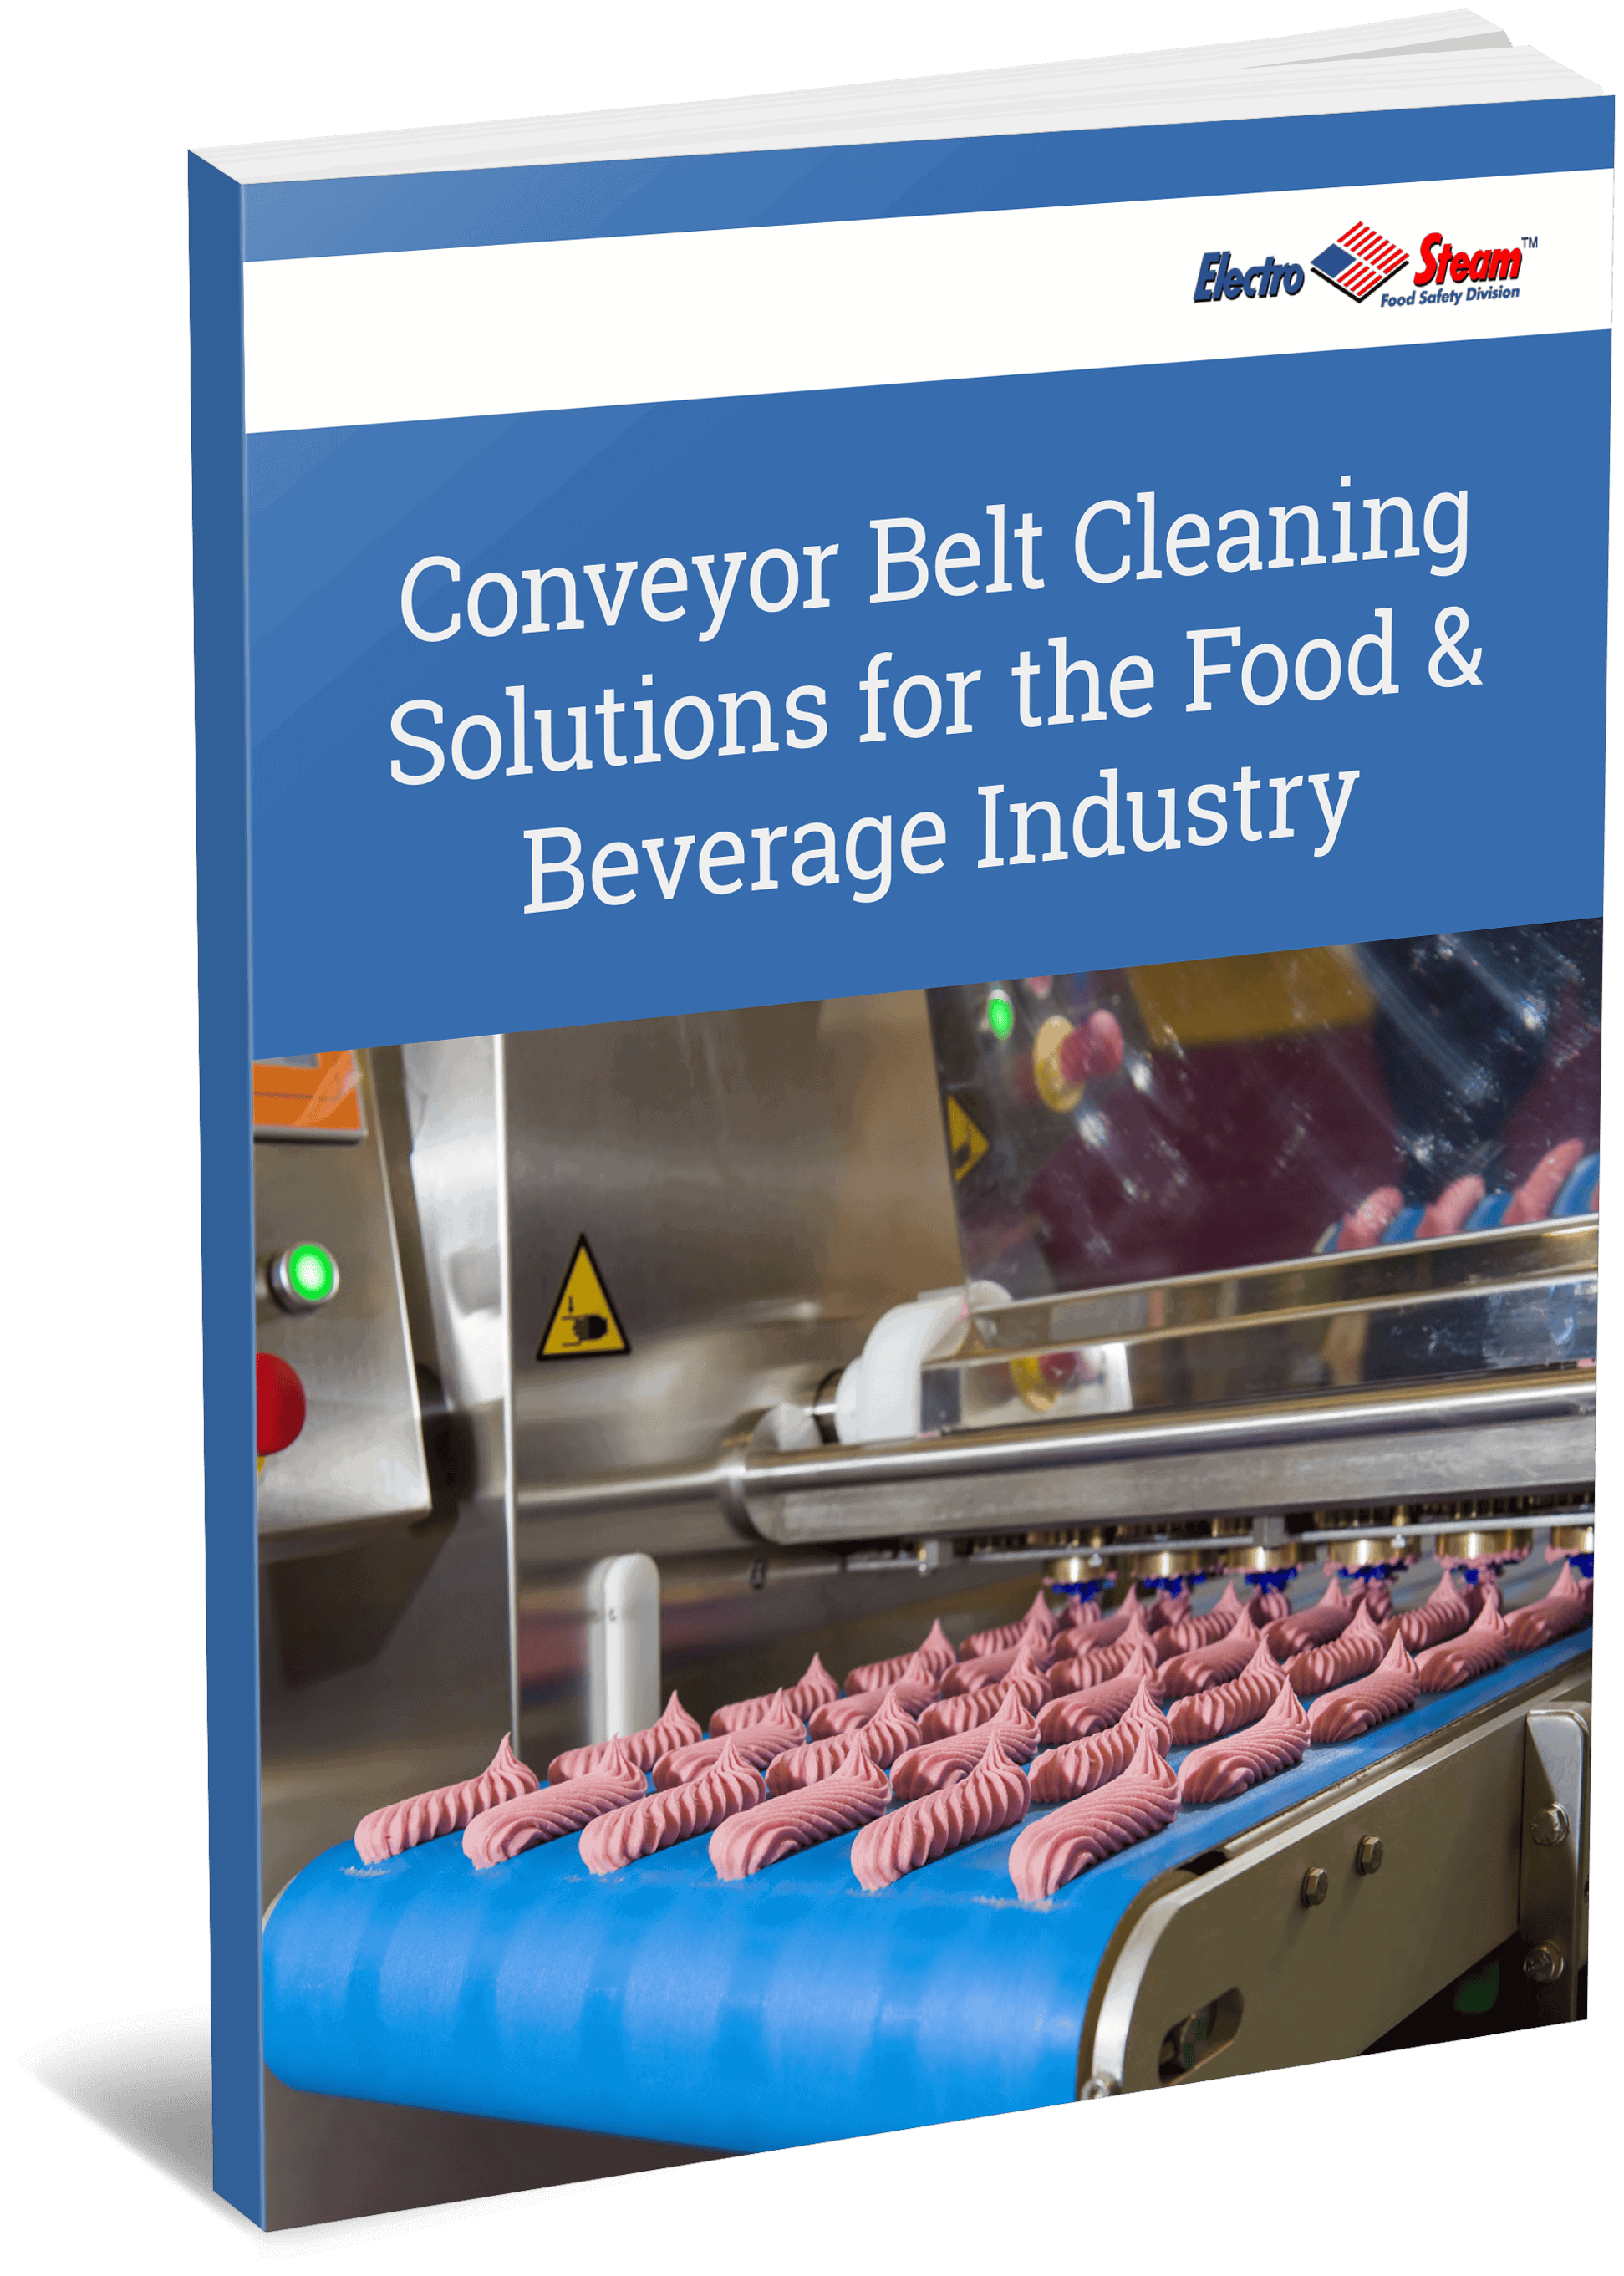 Conveyor Belt Cleaning Solutions for the Food & Beverage Industry